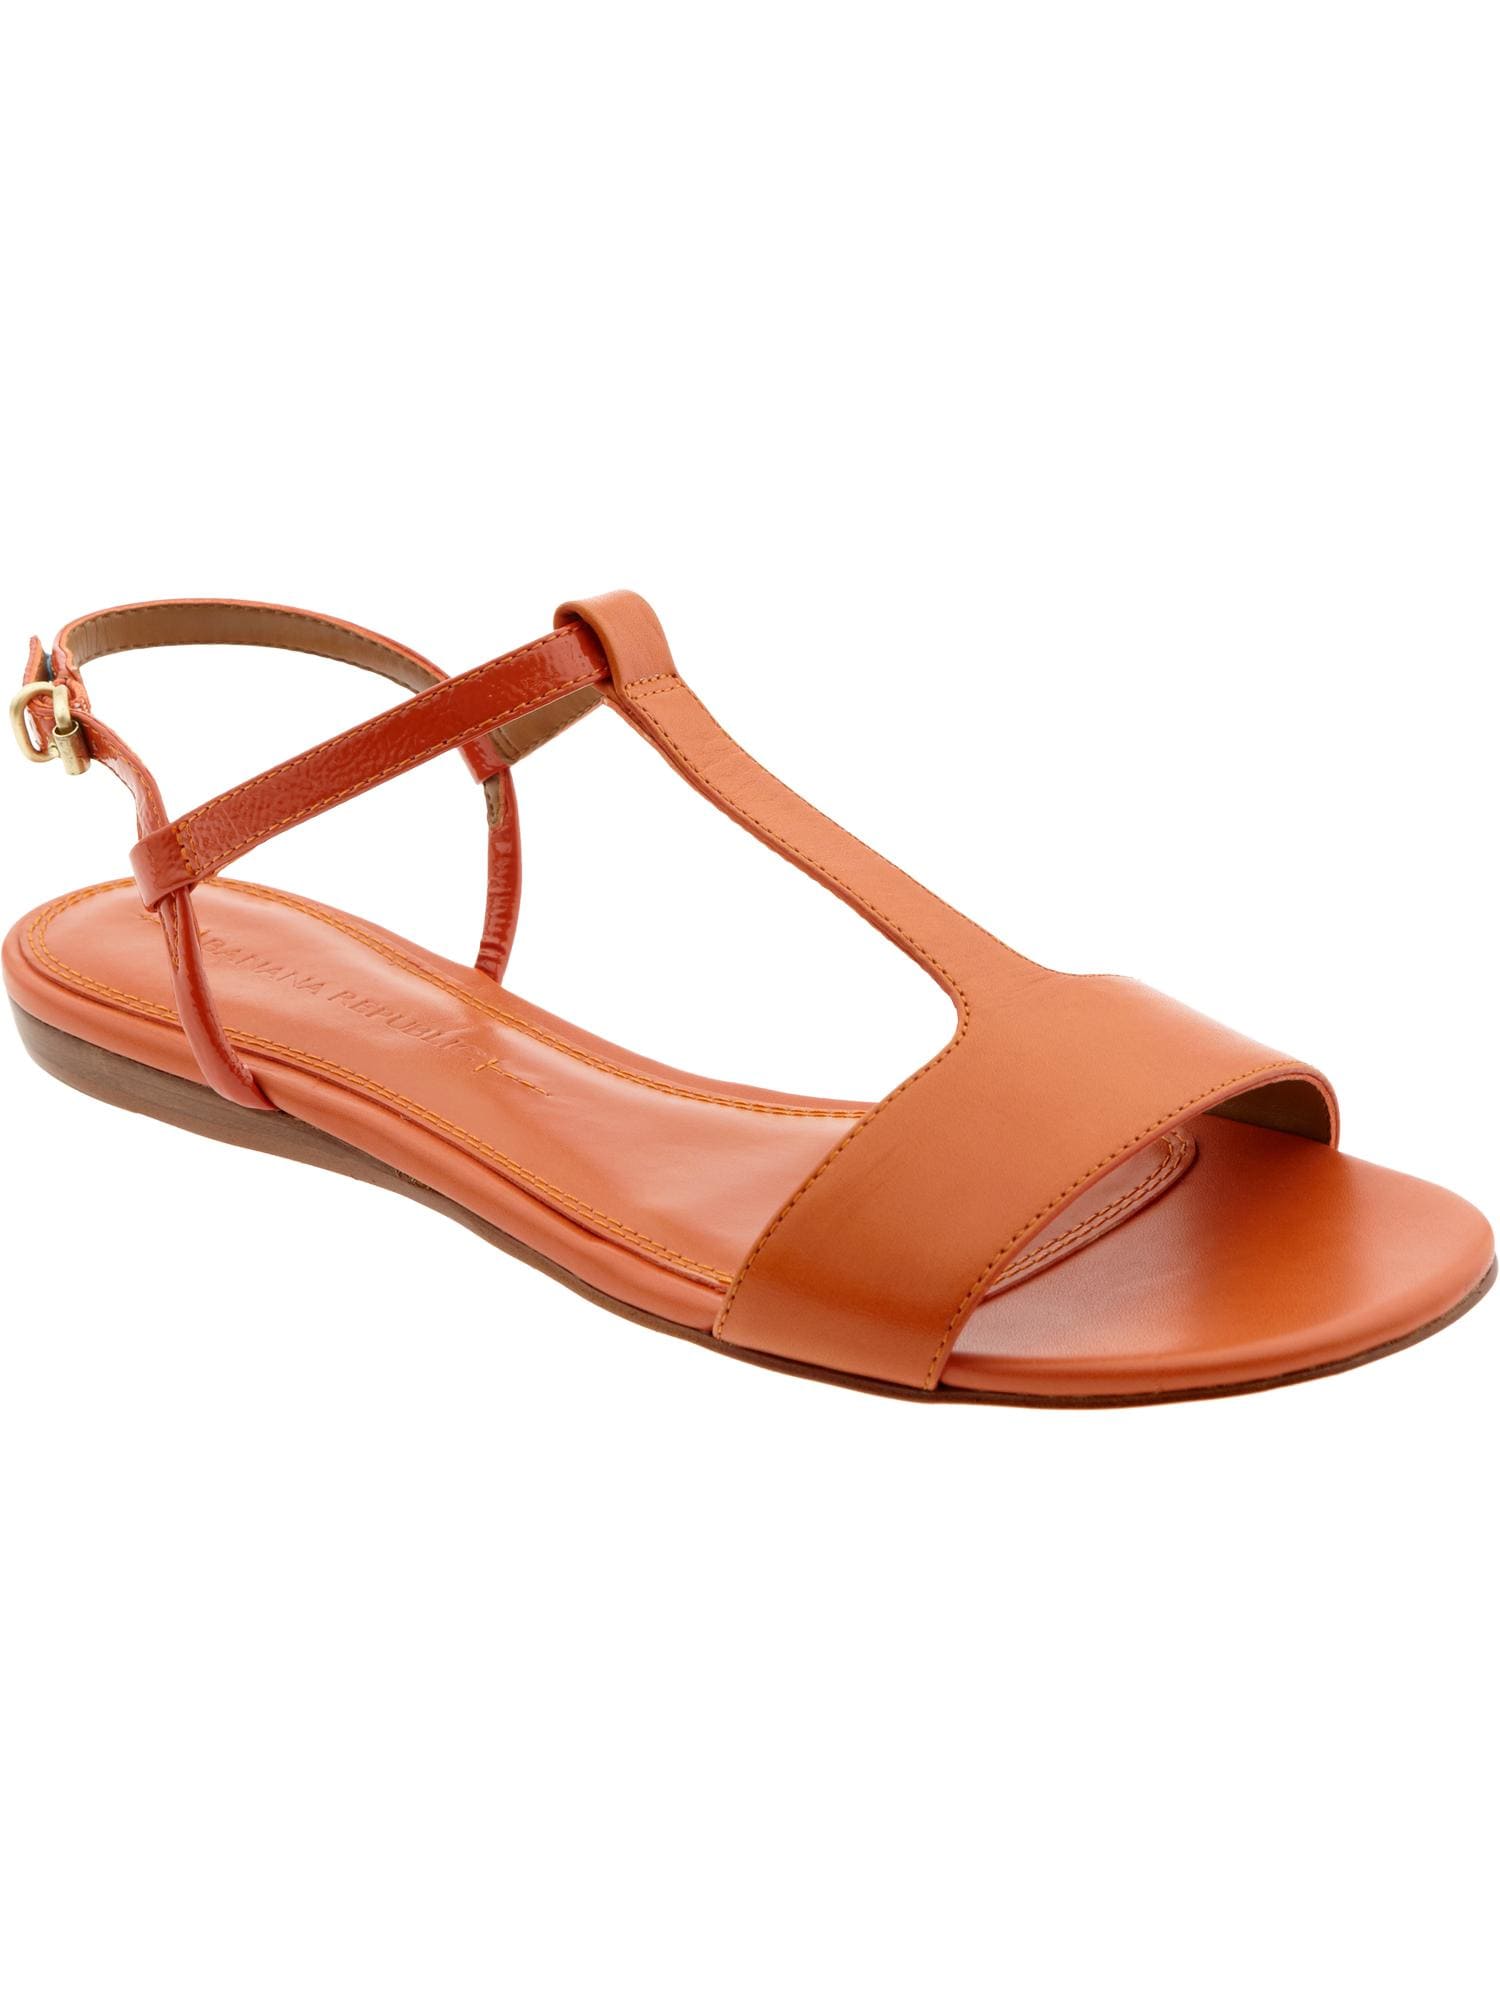 Stacey t-strap sandal